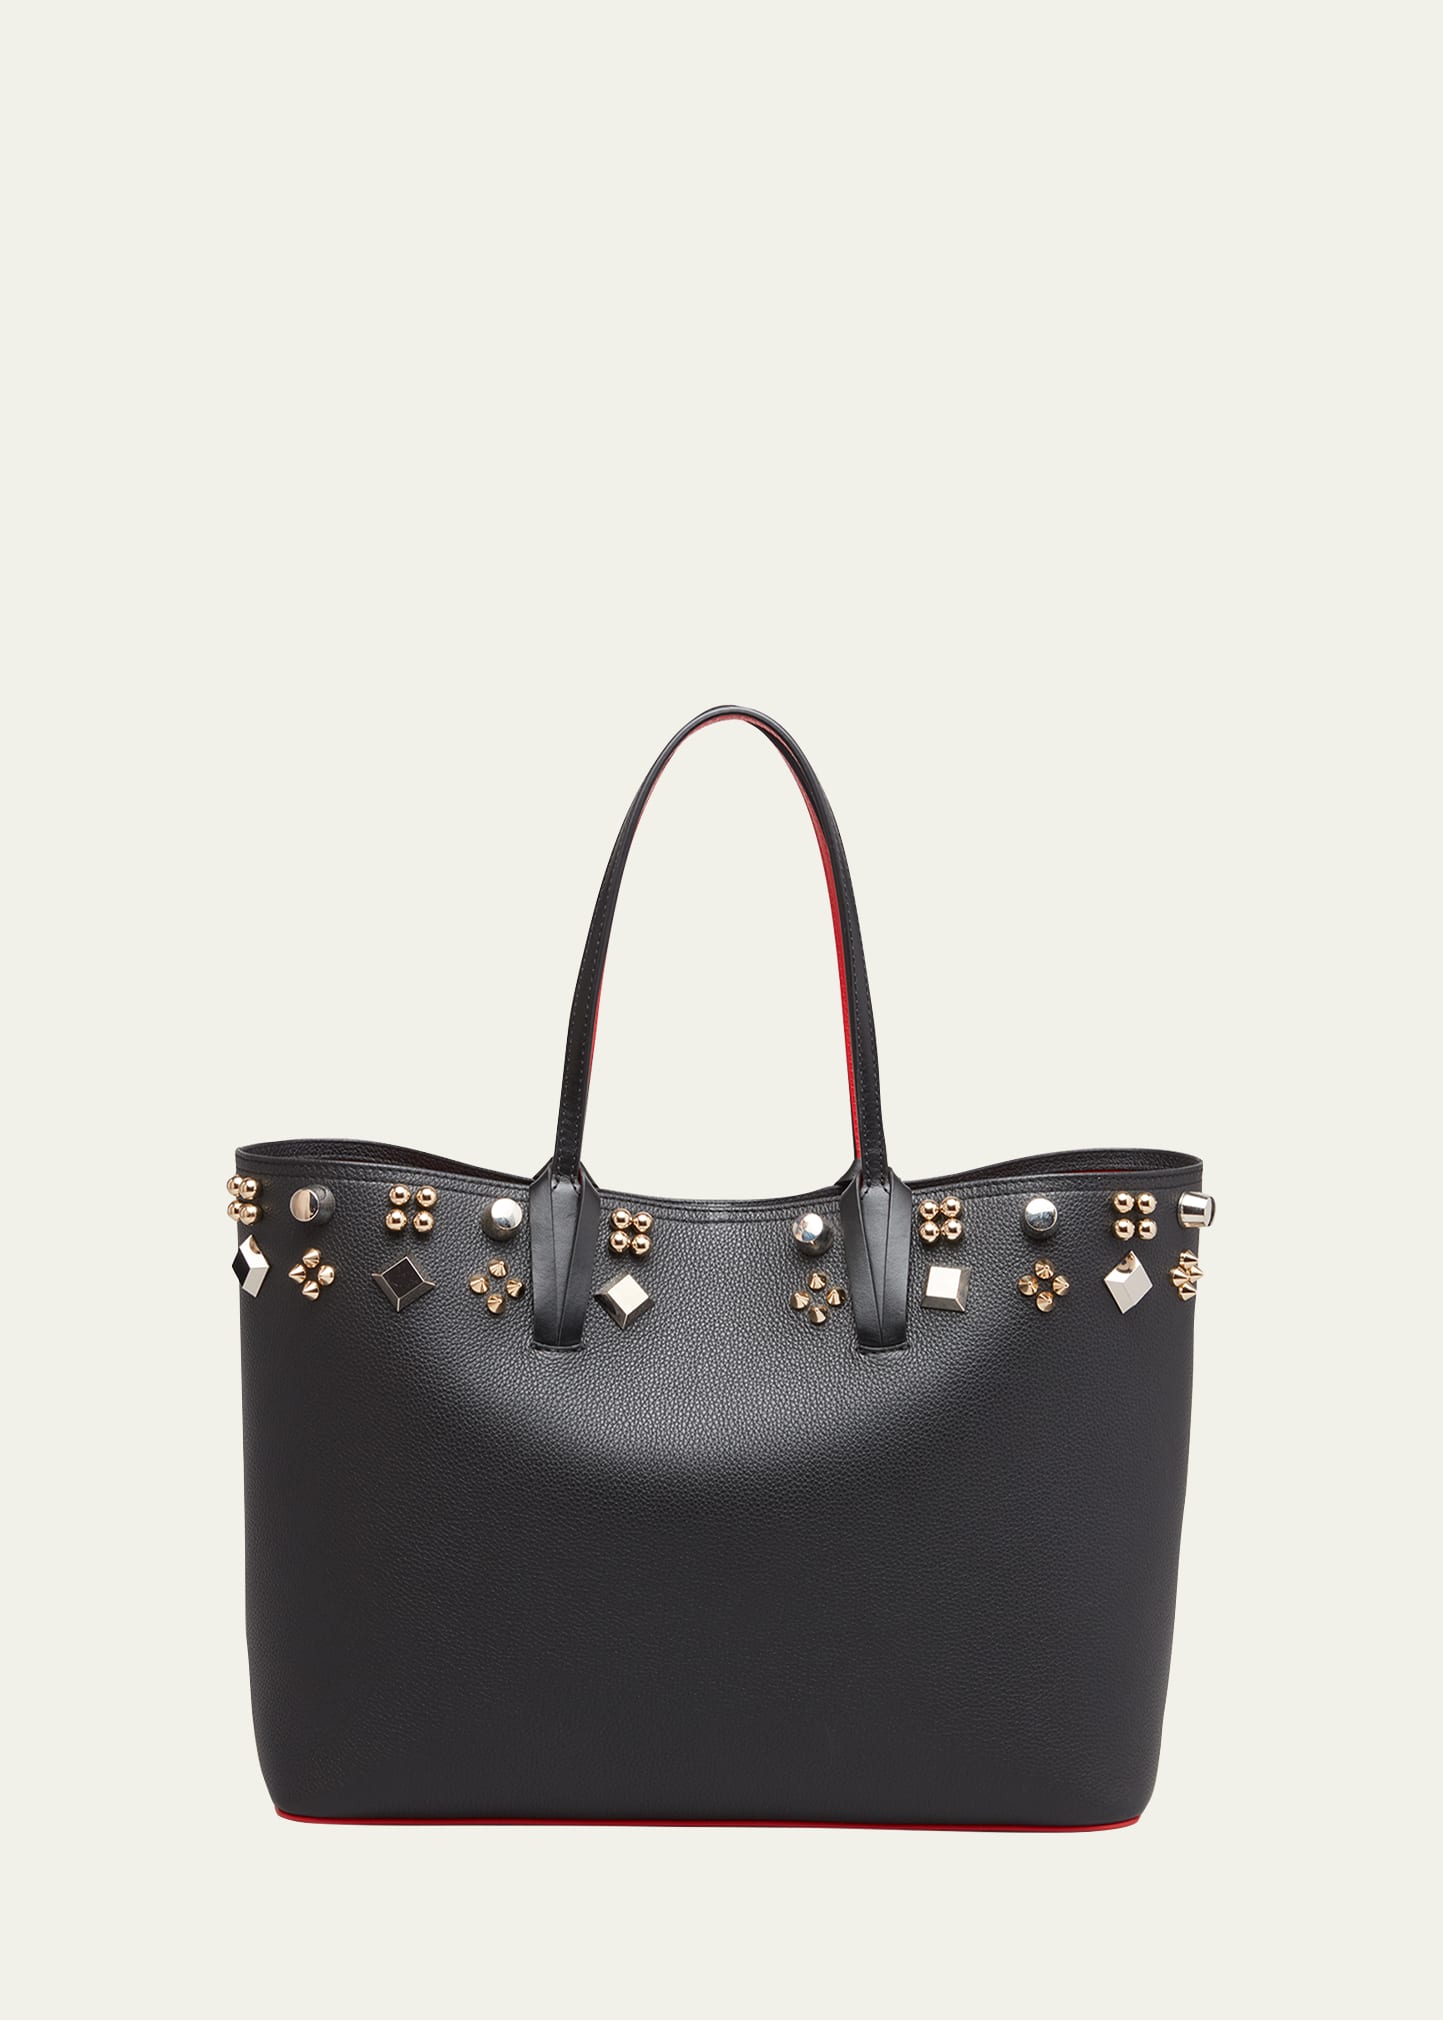 Cabata Tote in Grained Leather with Spikes